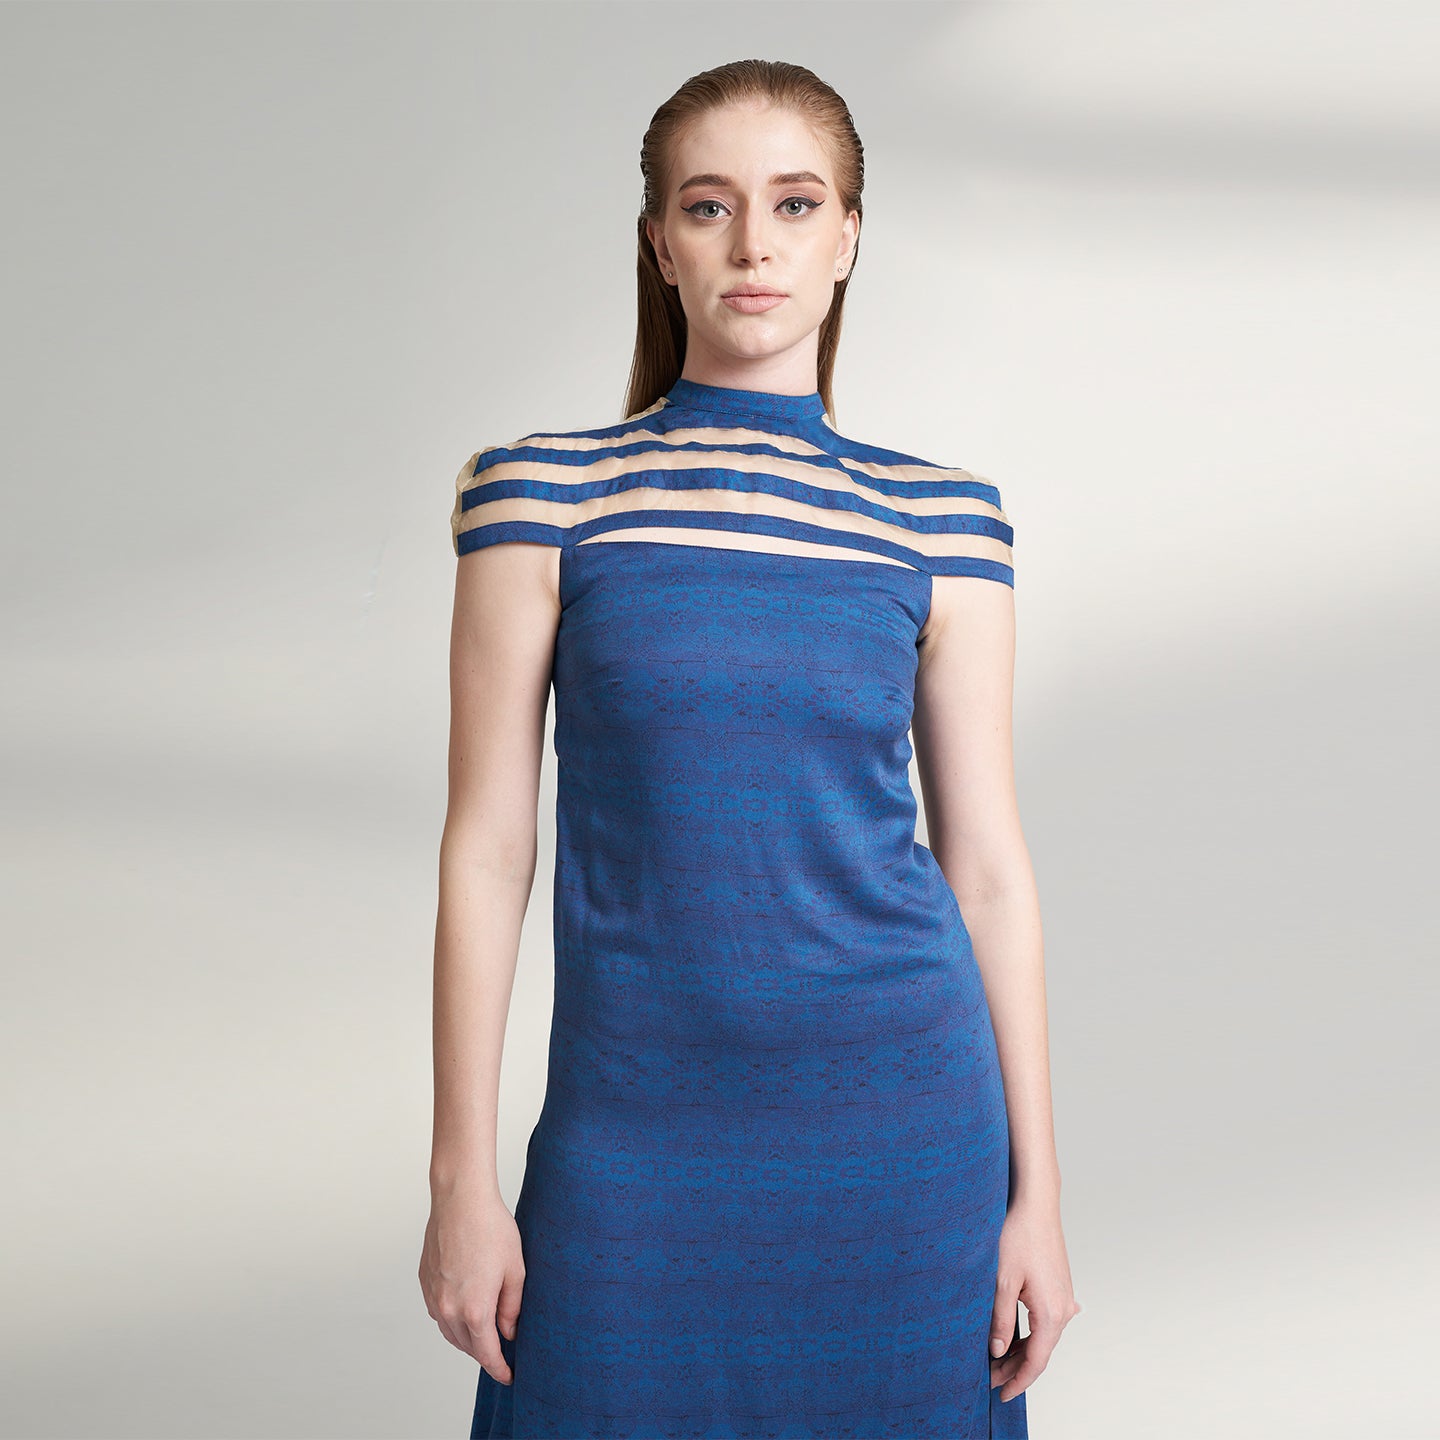 A printed blue long evening dress crafted in organic lotus silk and organza fabric accentuated with a thigh high slit and a short stripe cape attached to the dress.